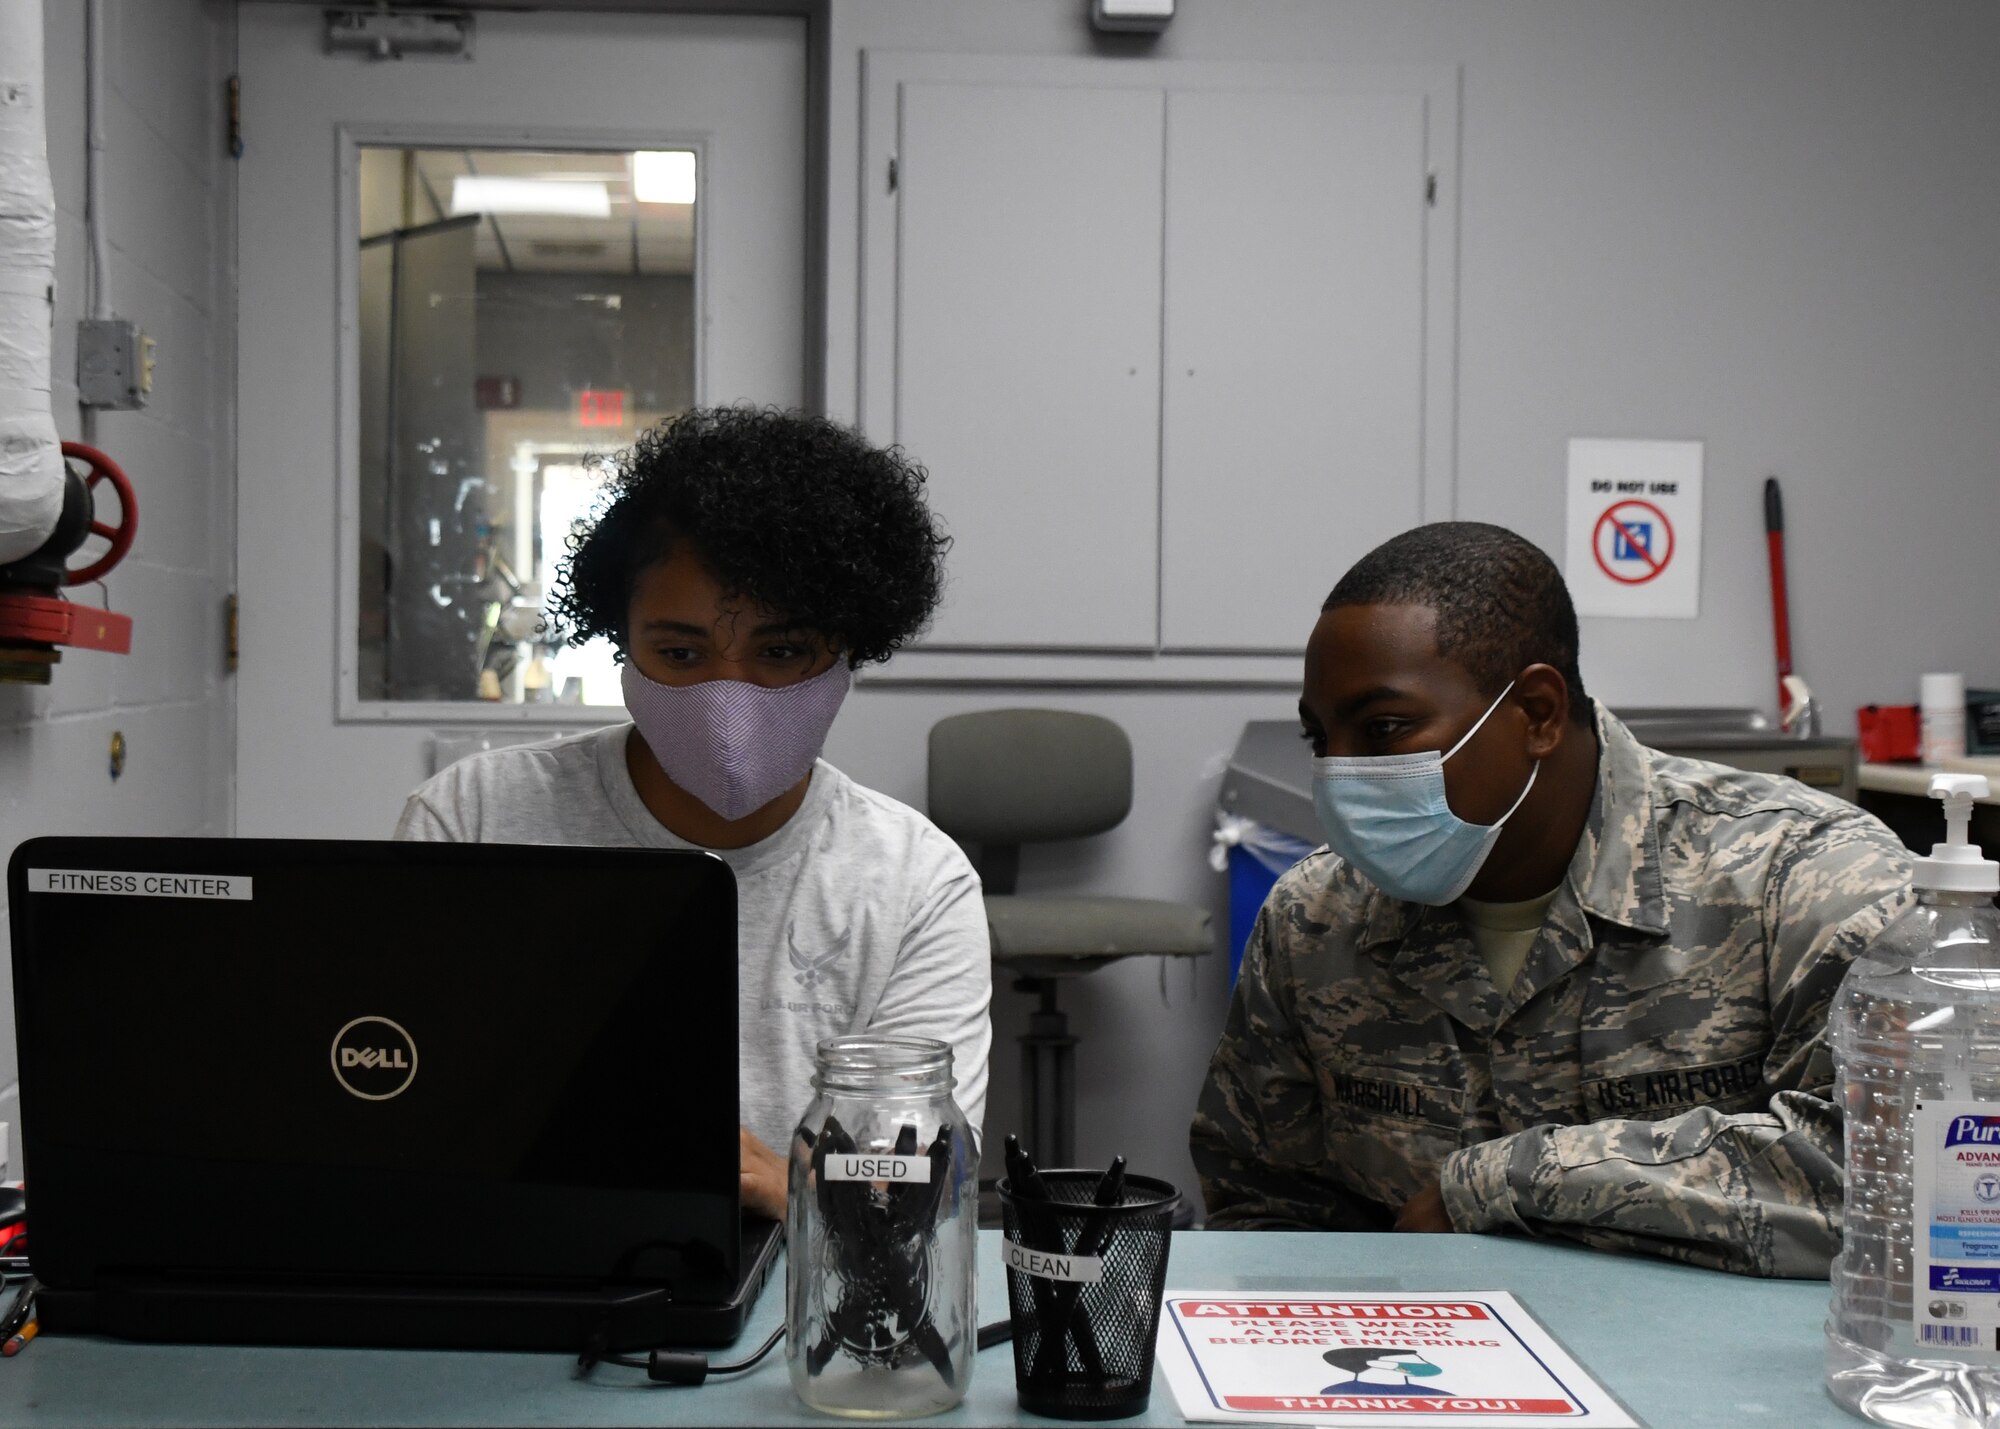 Airman Kyanda Wilson and Airman 1st Class Jason Marshall, Force Support Squadron Airmen, sit at the Base Fitness Room entrance prepared to sign Airmen in to workout, July 24, 2020, at Barnes Air National Guard Base, Massachusetts. Due to the COVID-19 pandemic, wing members who choose to work out need to sign in and follow stricter guidelines in order to maintain a safe and healthy environment.  (U.S. Air National Guard photo by Senior Airman Sara Kolinski)